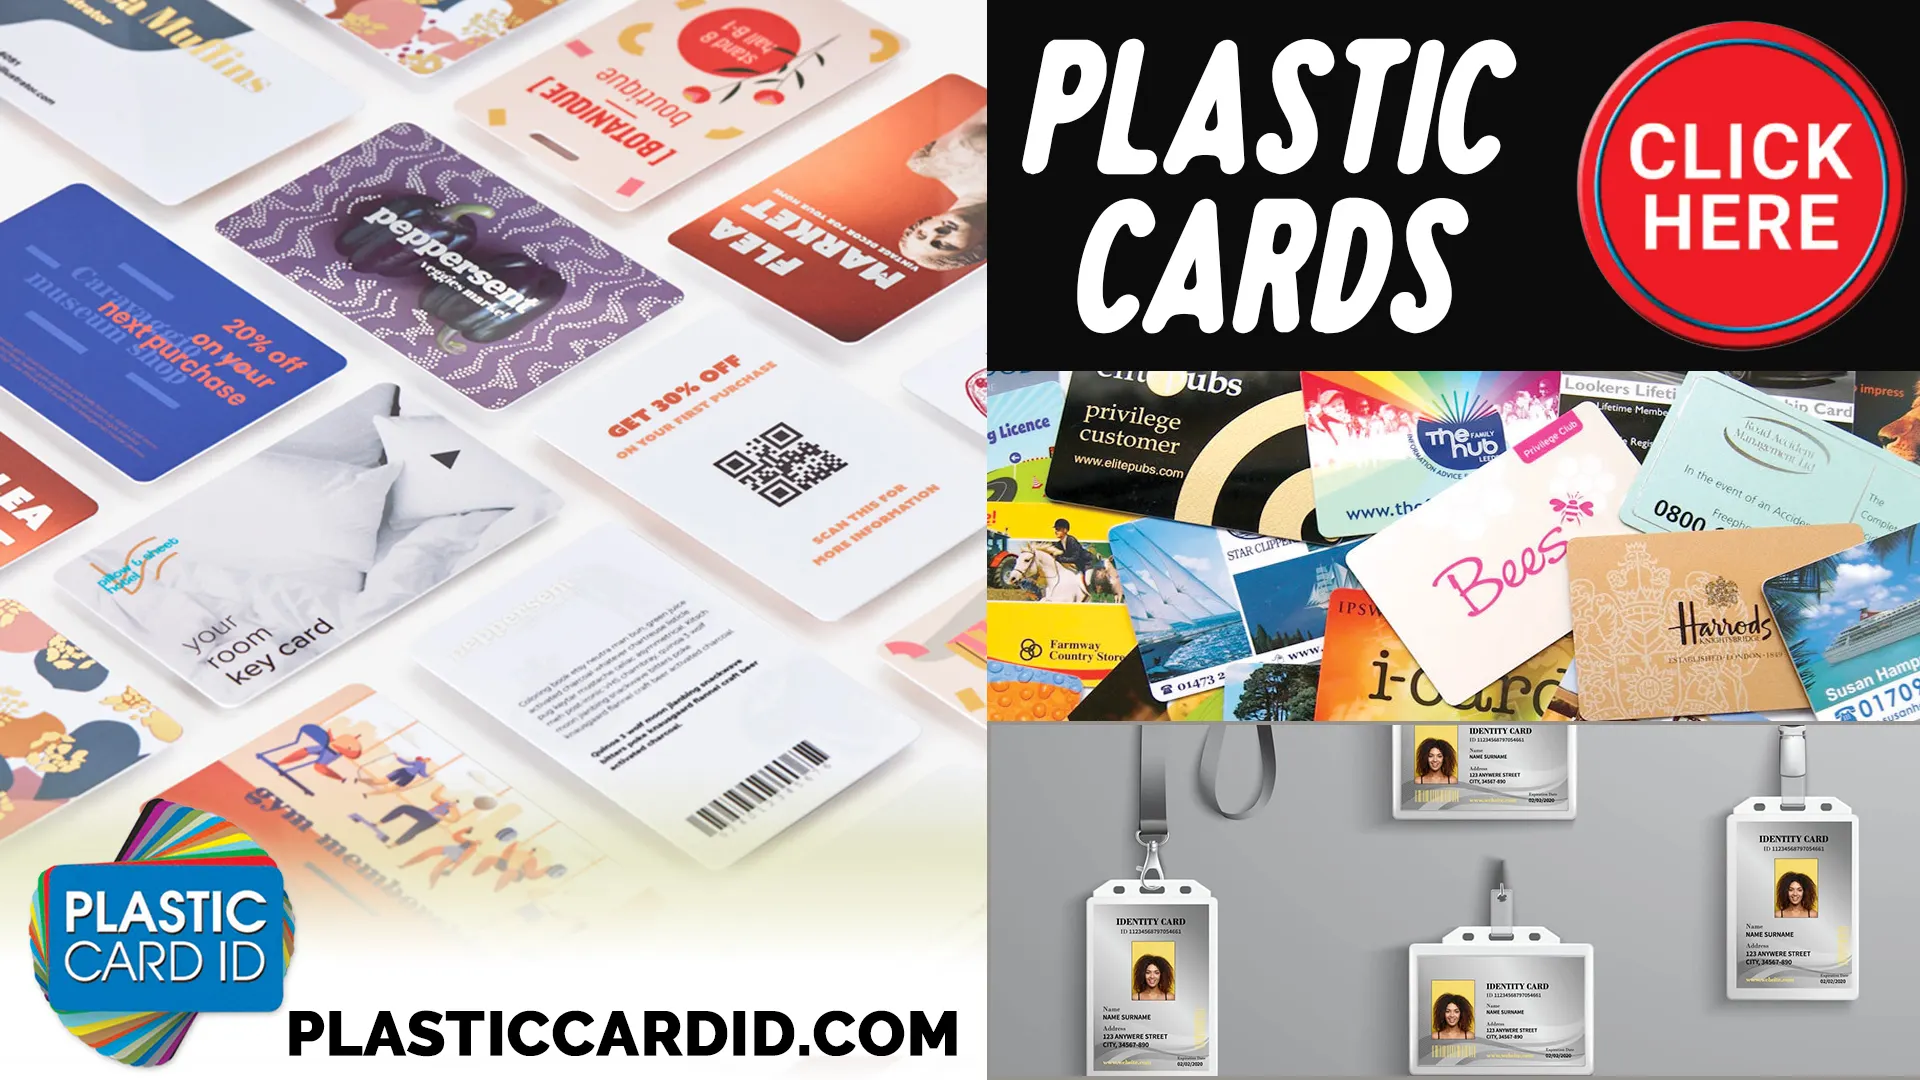 The Range of Composite Materials at Plastic Card ID
